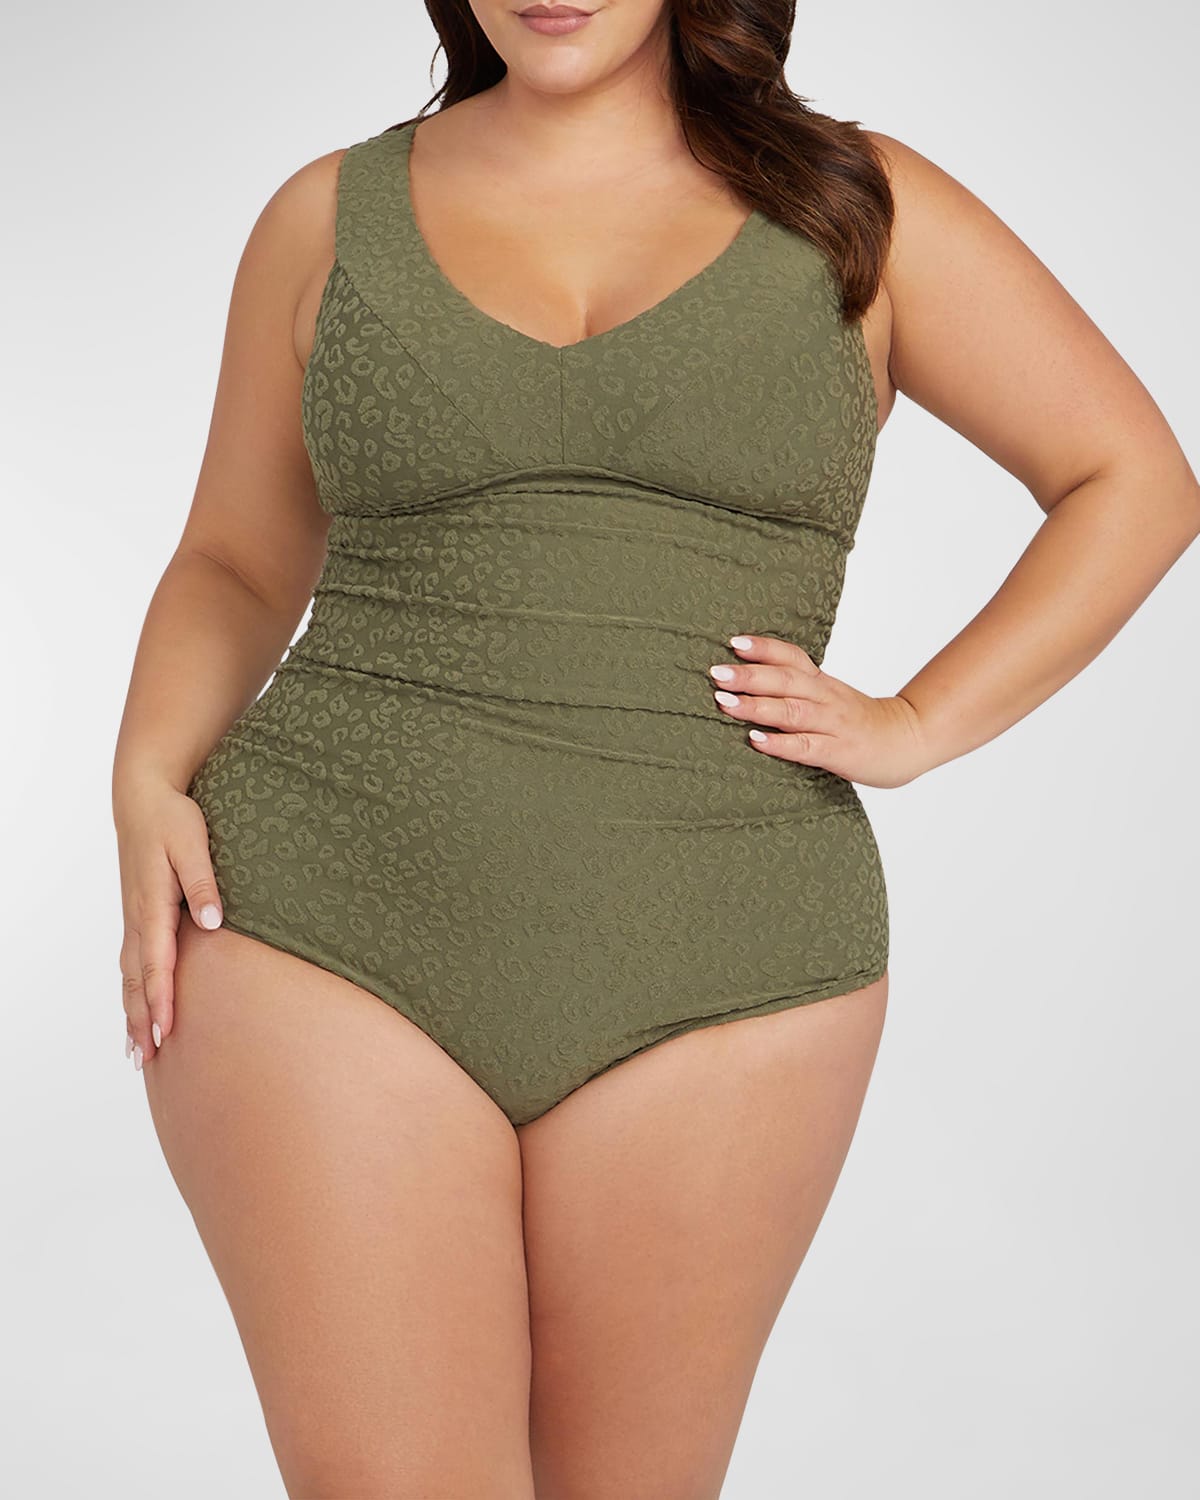 Plus Size Magritte One-Piece Swimsuit